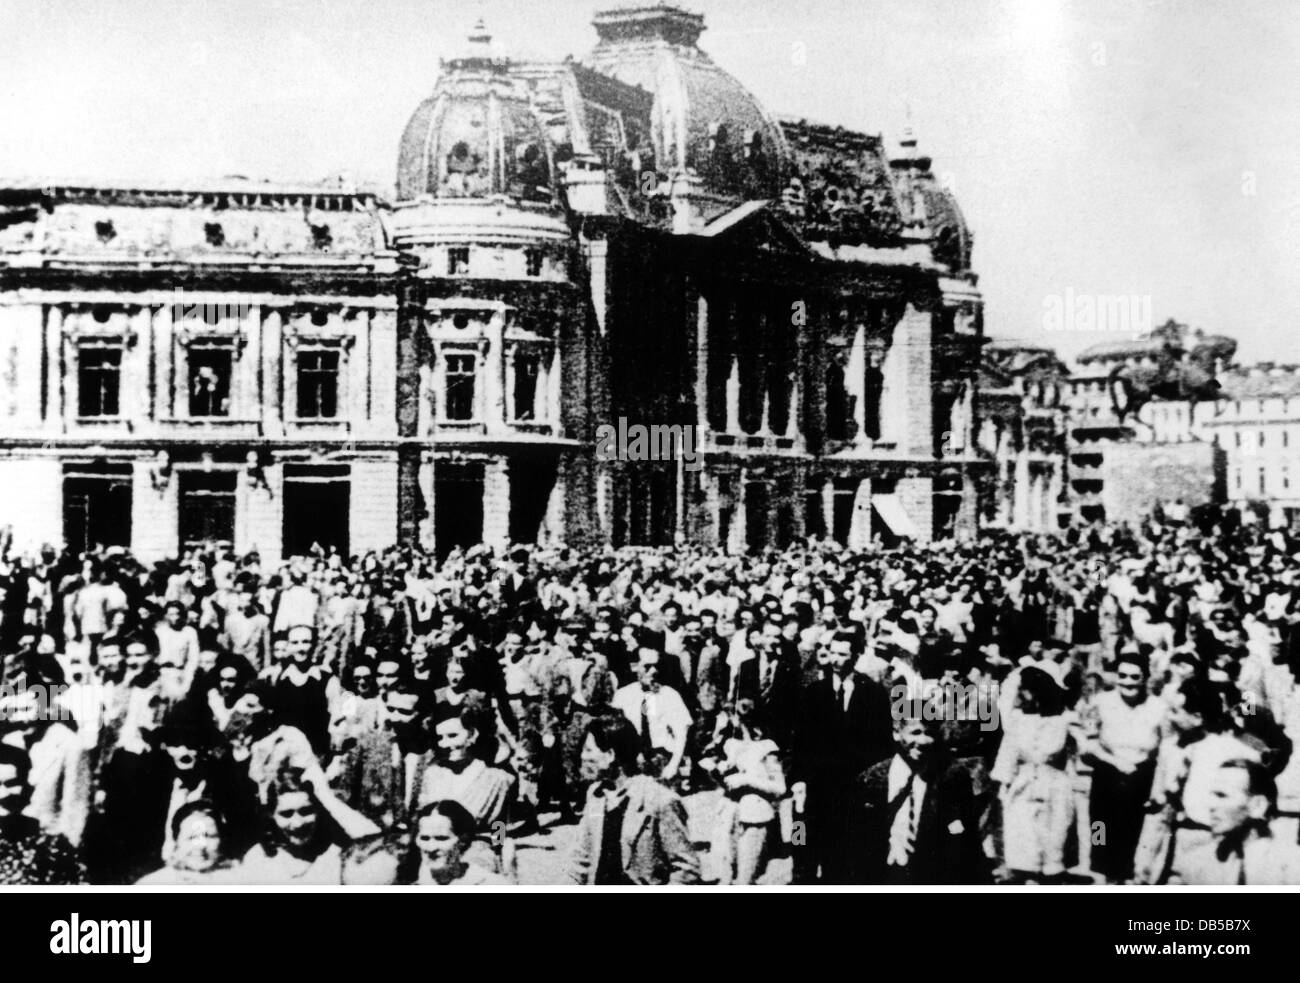 events, Second World War / WWII, Romania, insurrection / declaration of war on Germany, August 1944, public manifestation in Bucharest after the successful uprising on 23.8.1944, overthrow, oust, insurgence, communism, change of sides, 20th century, historic, historical, people, crowd, square, 1940s, Additional-Rights-Clearences-Not Available Stock Photo